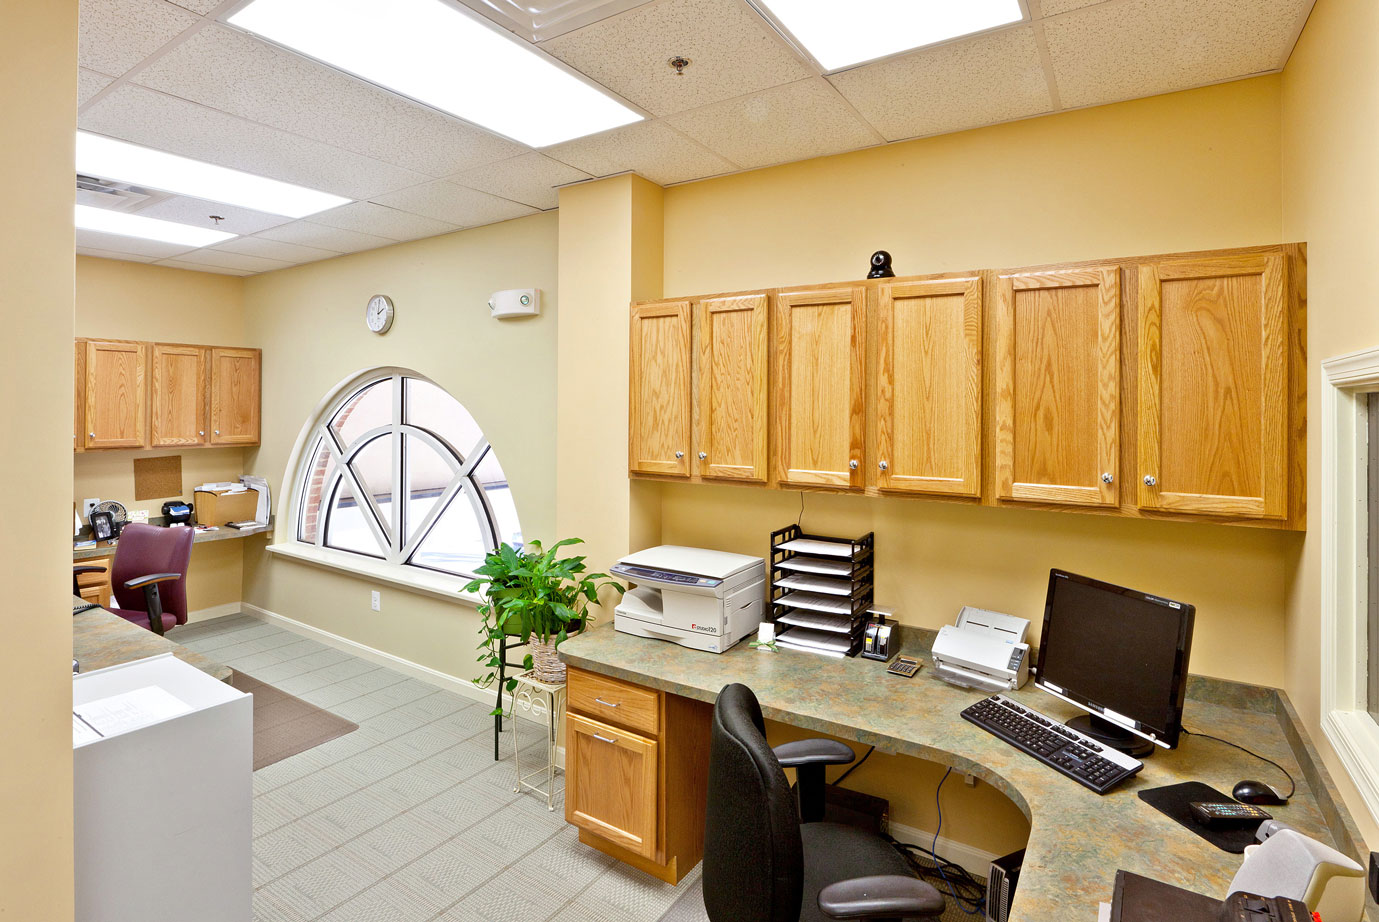 Image of caseco valleymedicalcenter 4 - caseco commercial